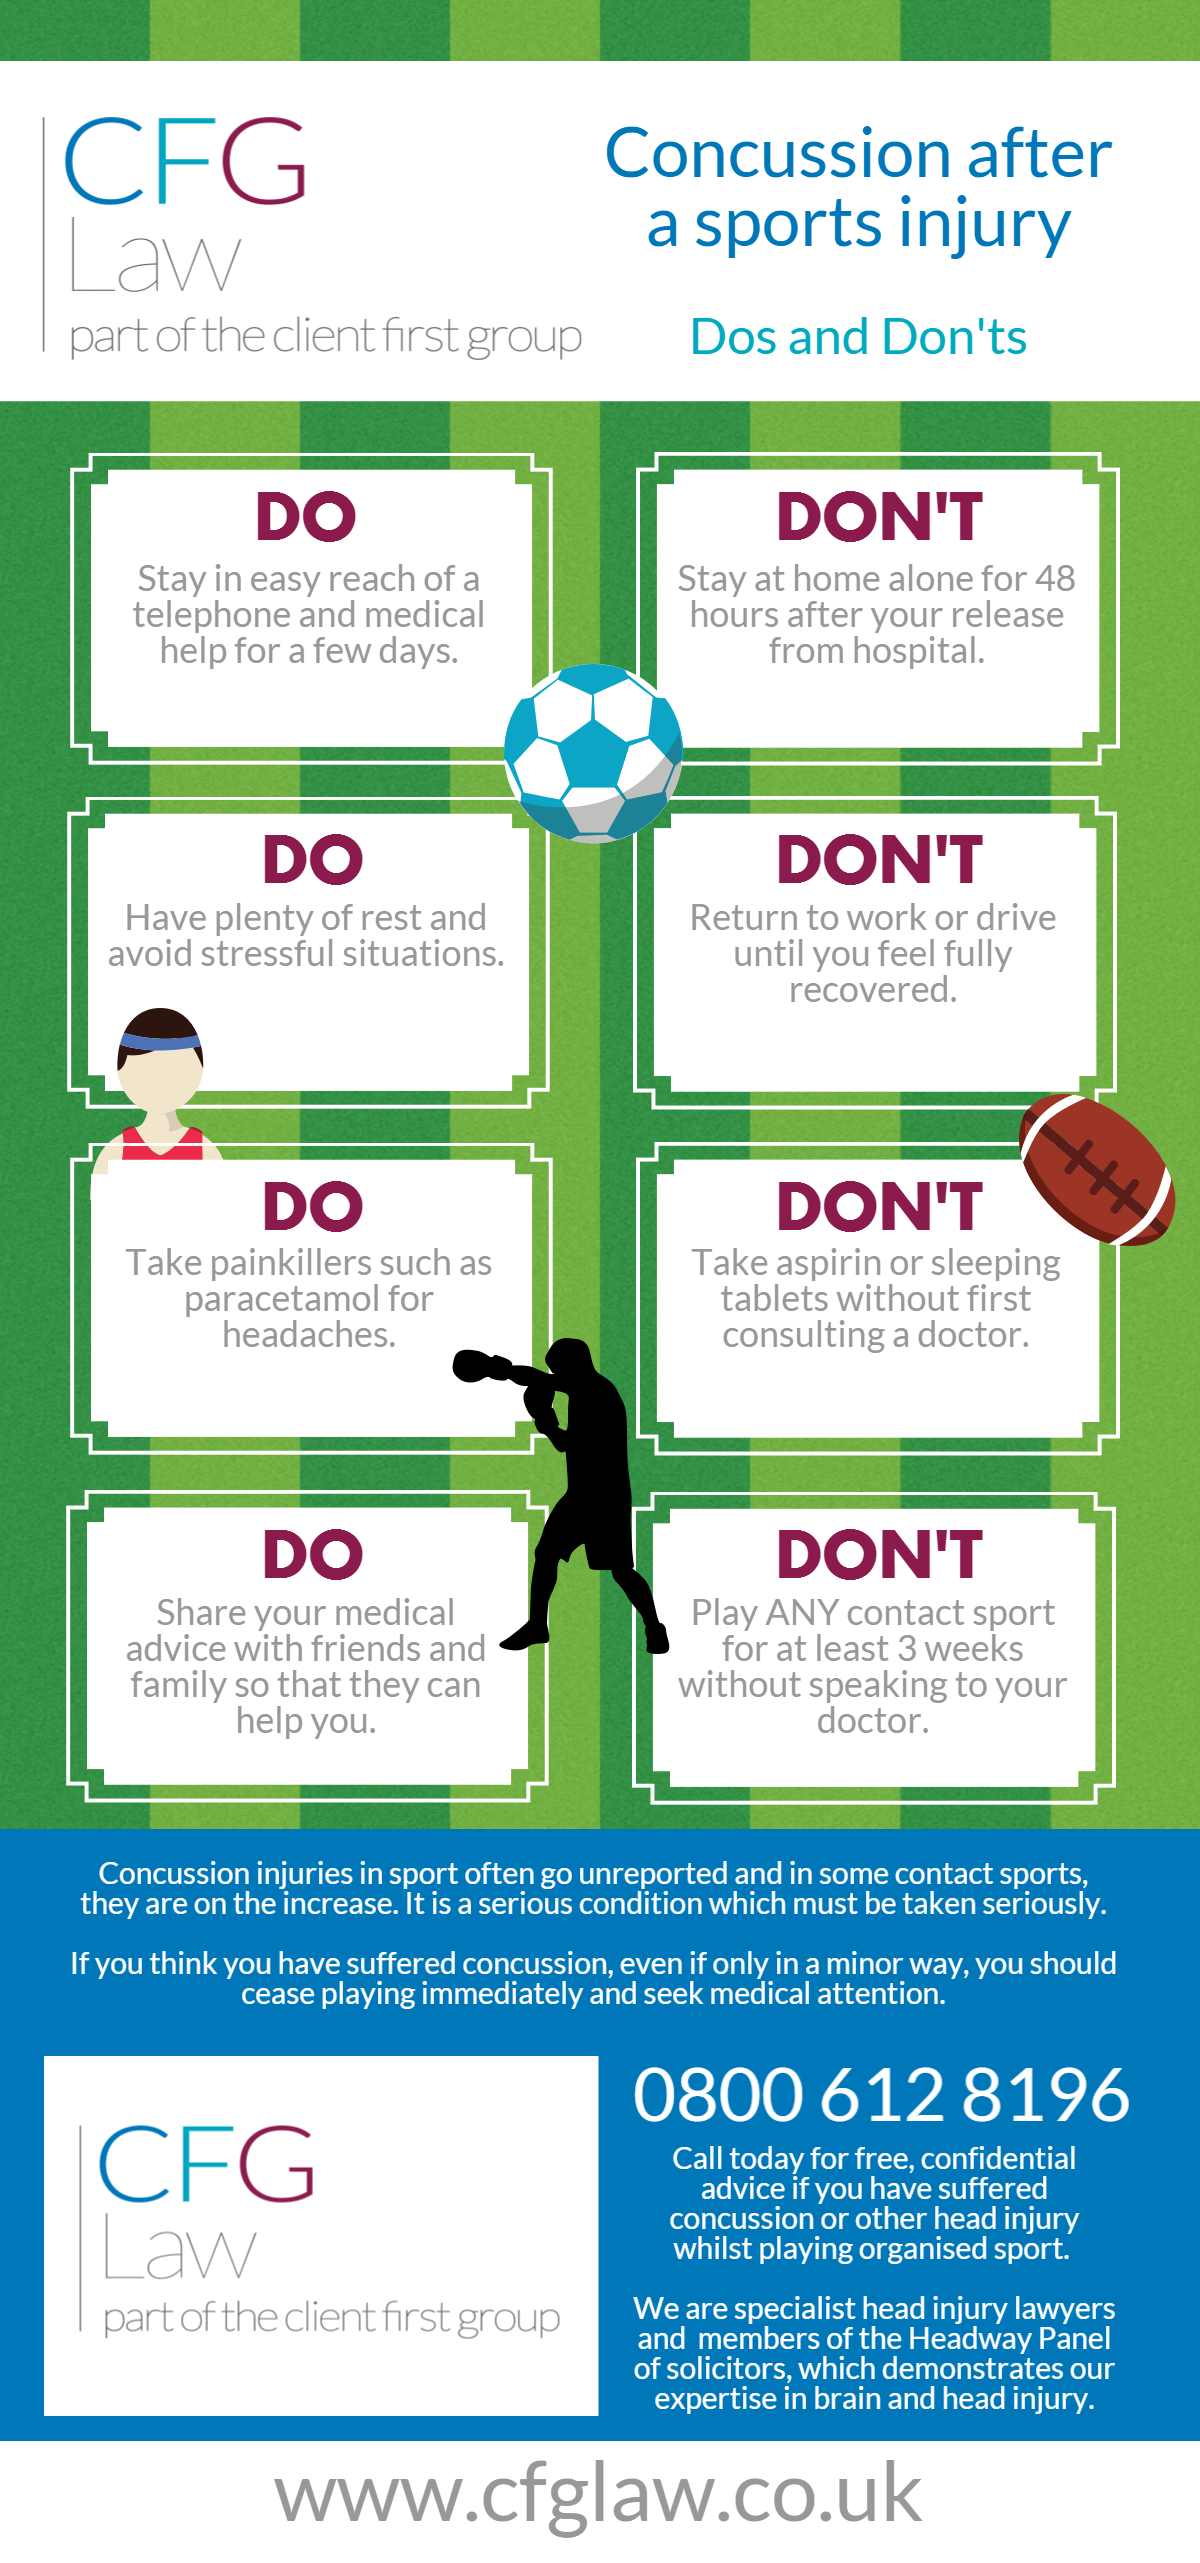 The dos and don'ts following a suspected sport concussion